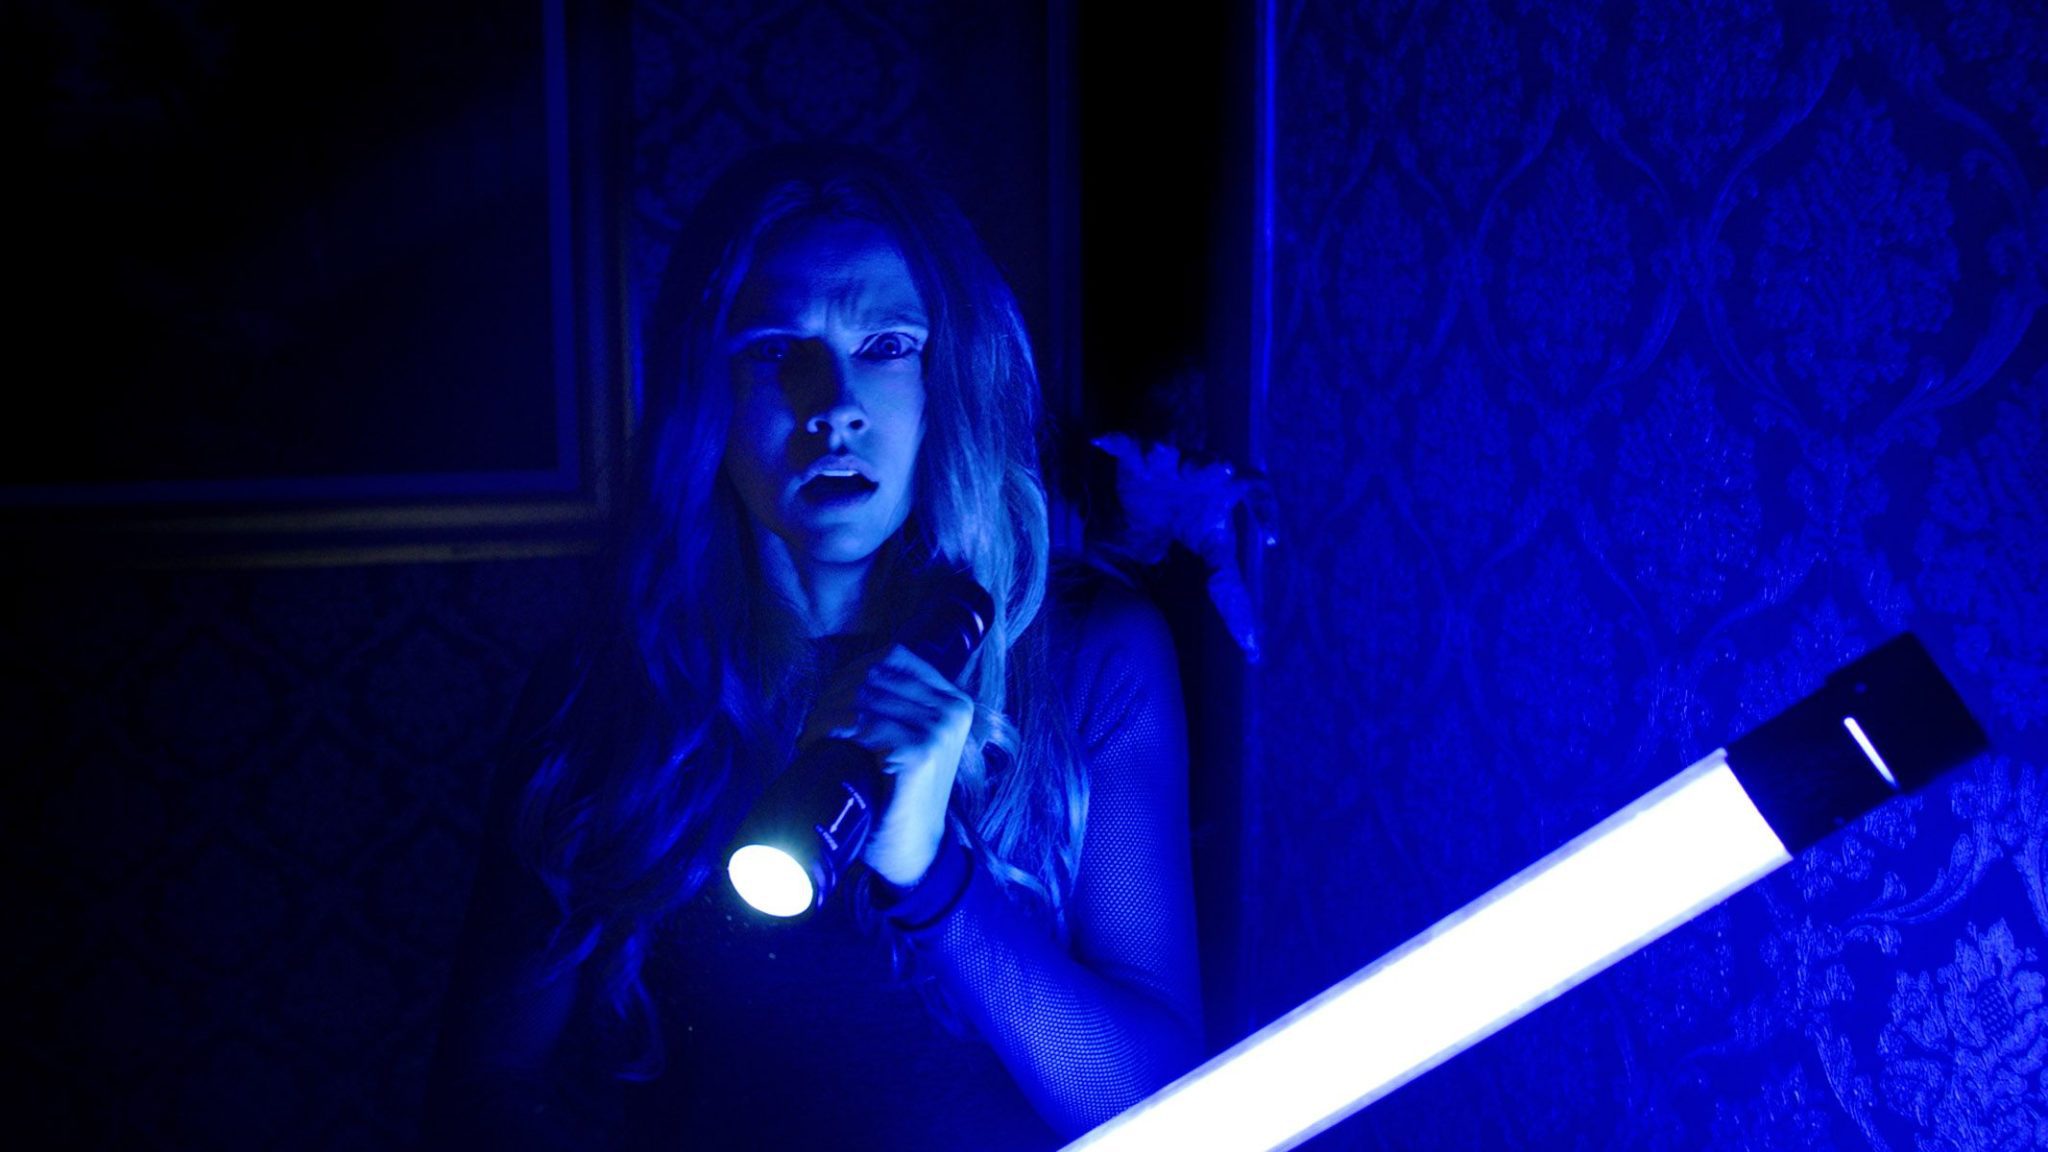 Bad news Rebecca: you're only holding a tube light, not a lightsaber.